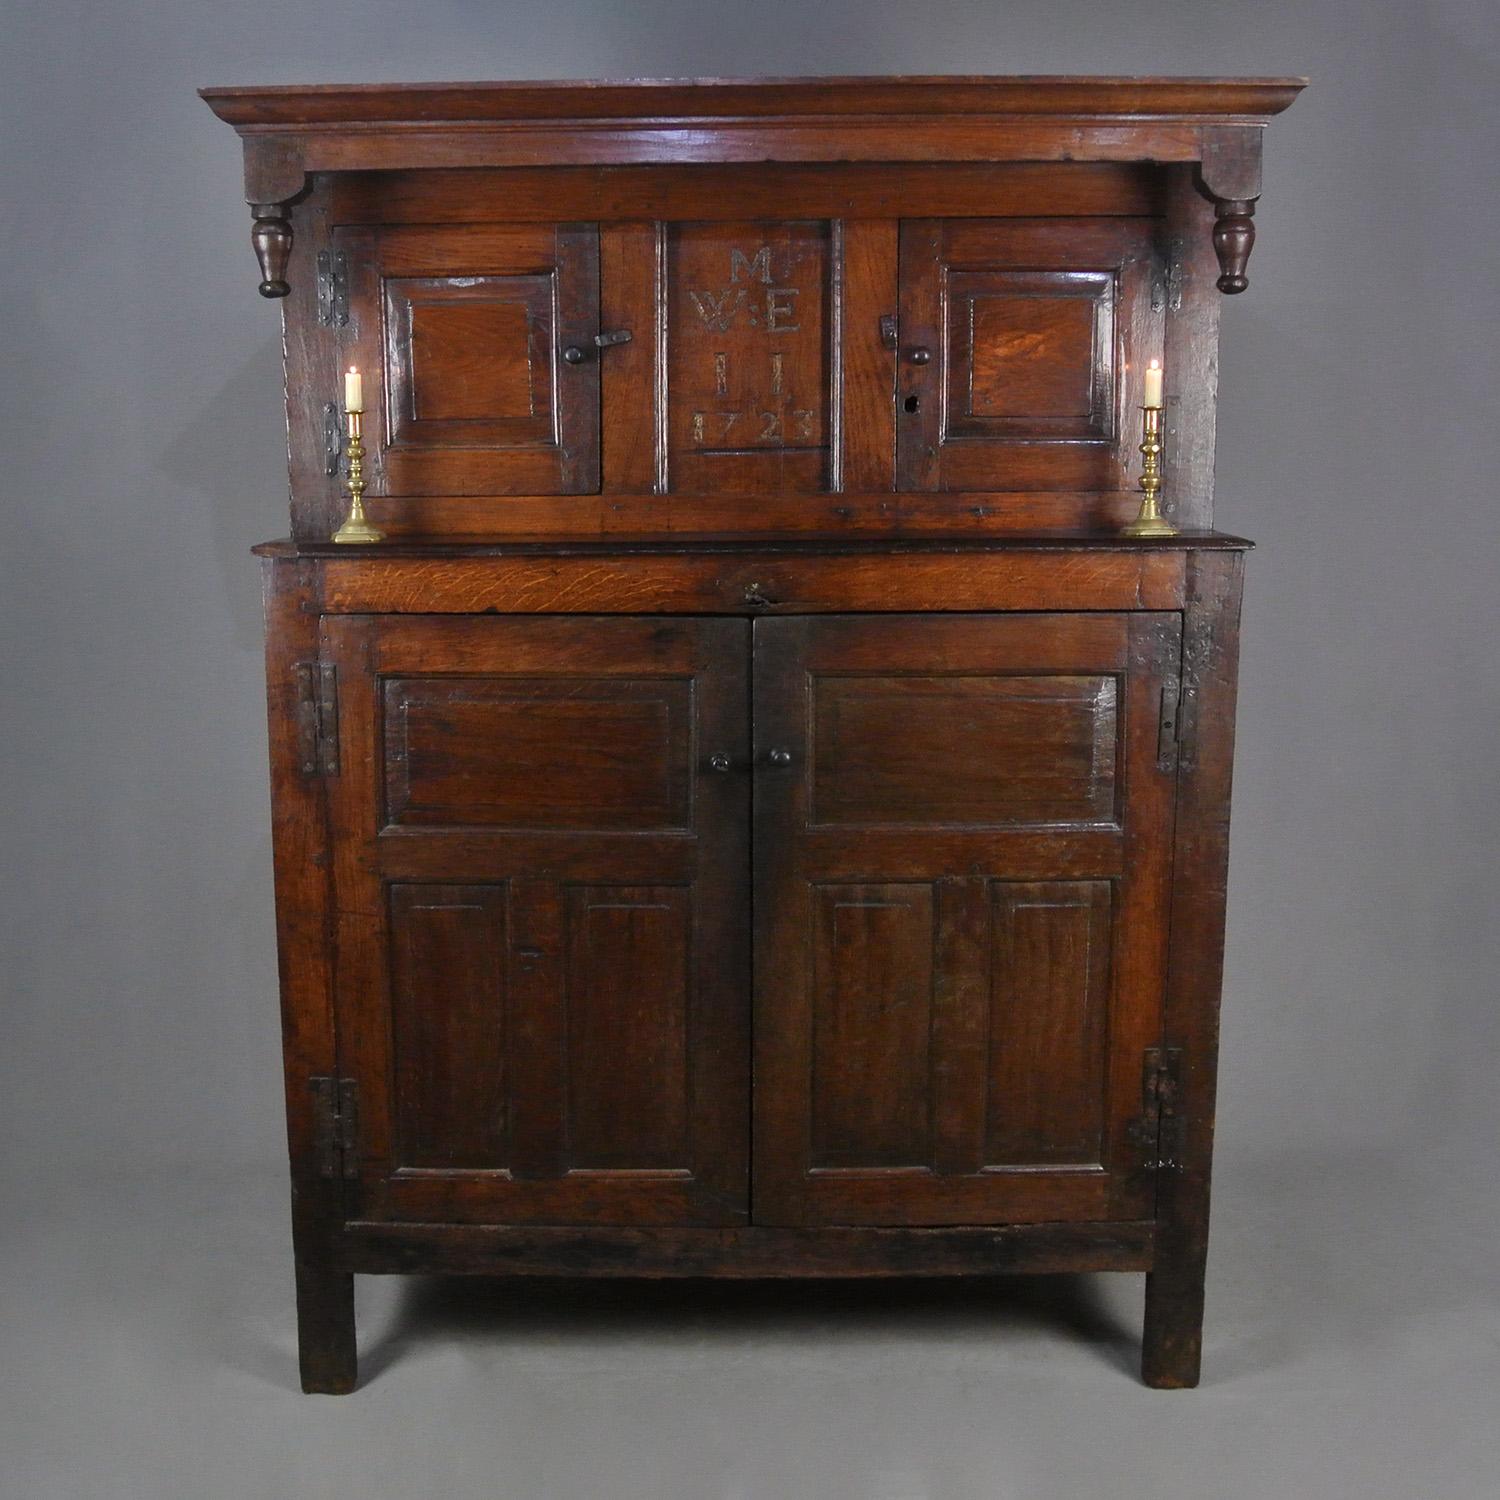 This superior quality and very beautiful English oak press cupboard is of tall and slender proportions and is within its 300th anniversary year.

The front panel is carved with the letters M (married) over W:E over I and I – William and Eliza Issacs